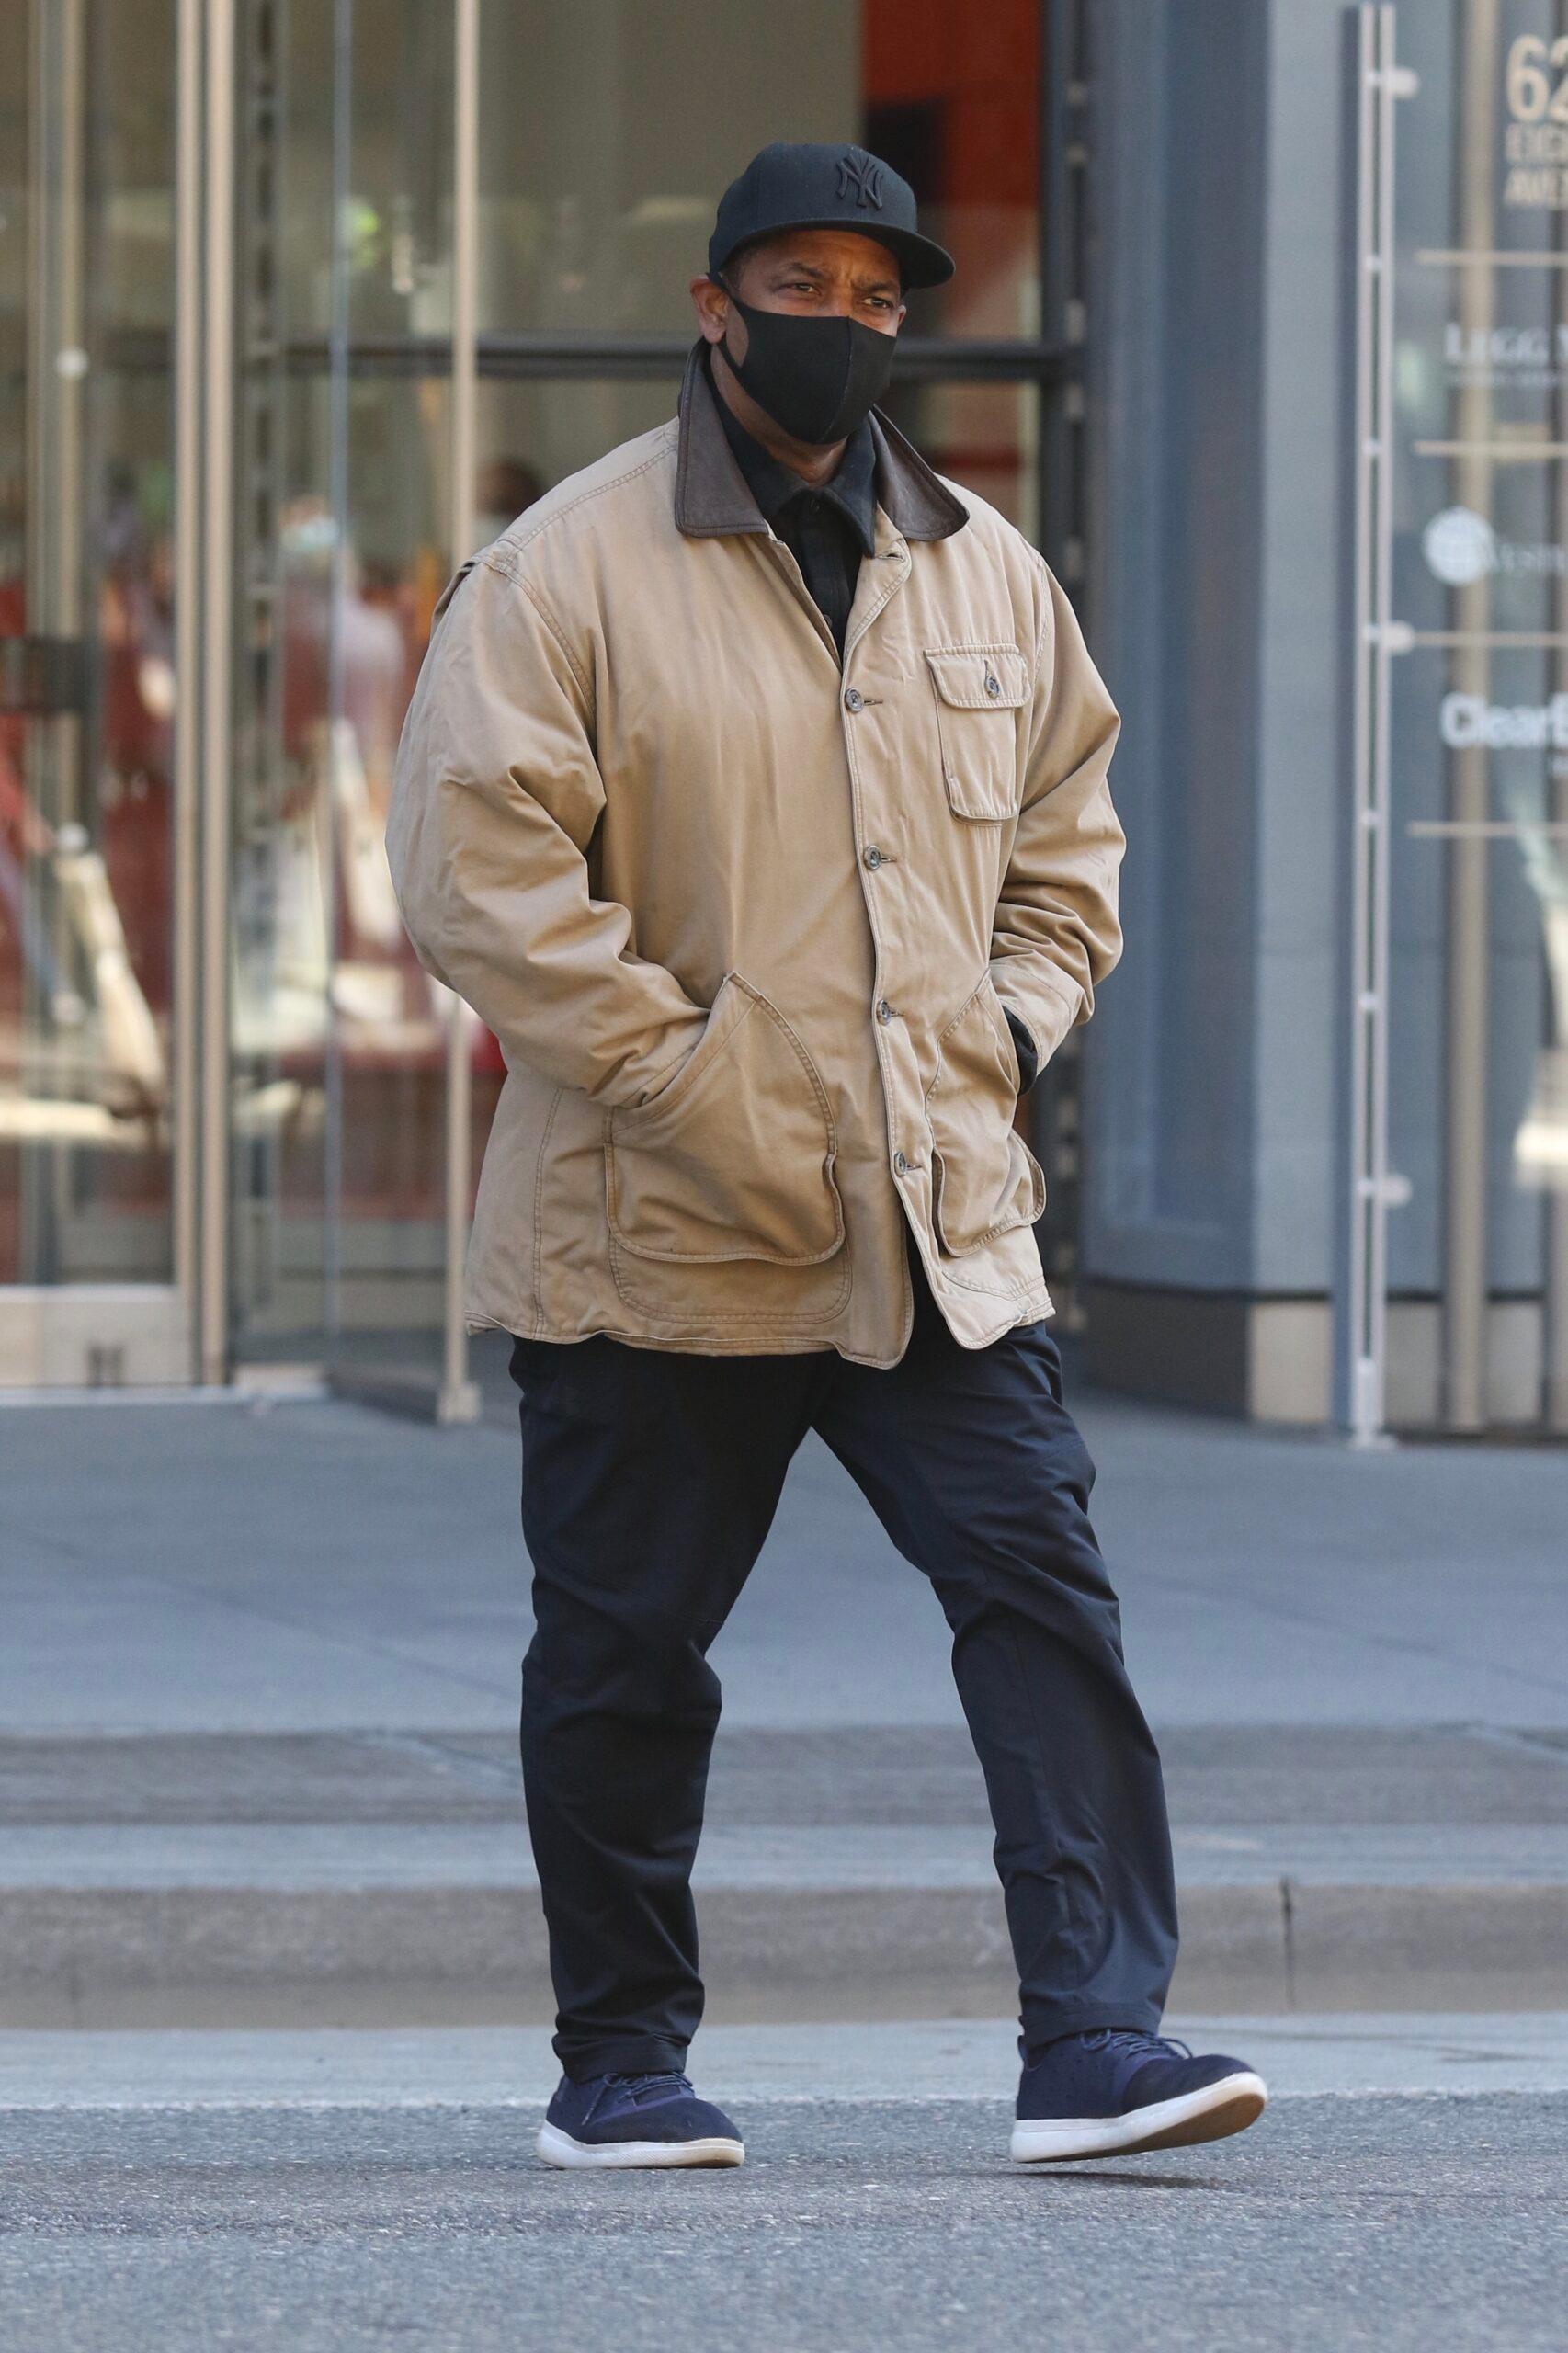 Denzel Washington all bundled up while on the set of his upcoming directed movie Journal for Jordan in NYC